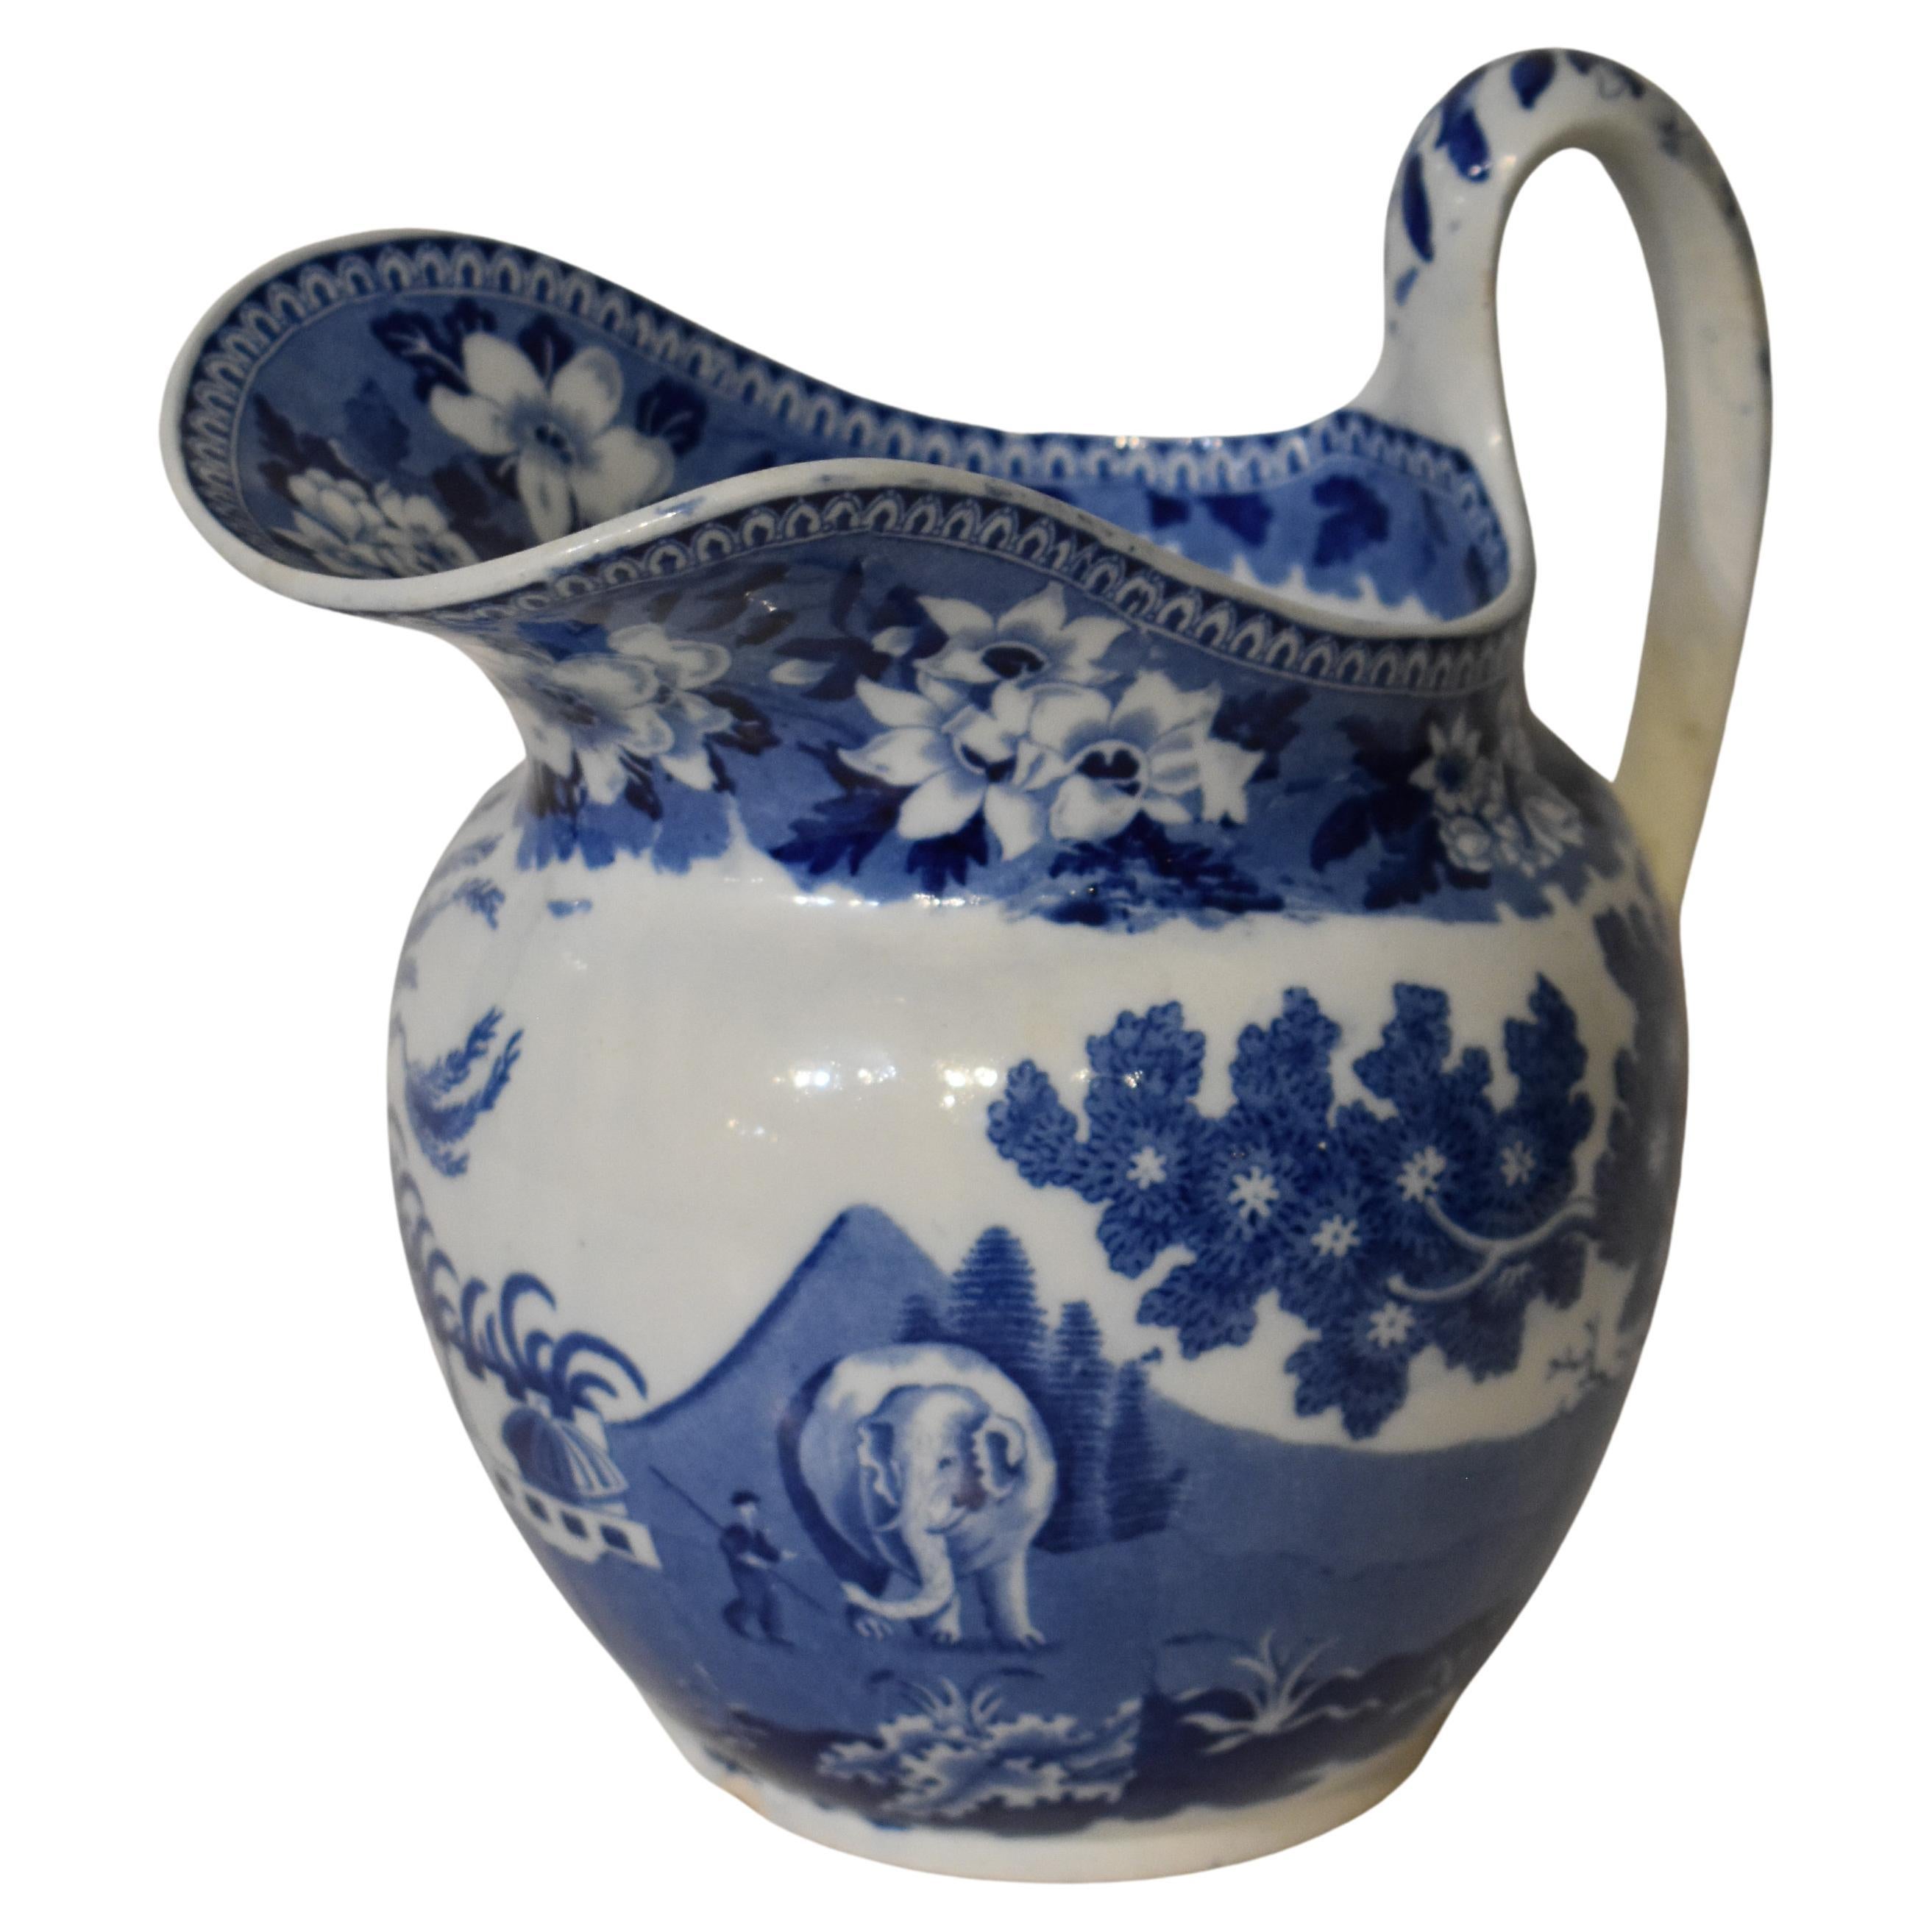 Historical Staffordshire Blue and White Pottery Pitcher circa 1845